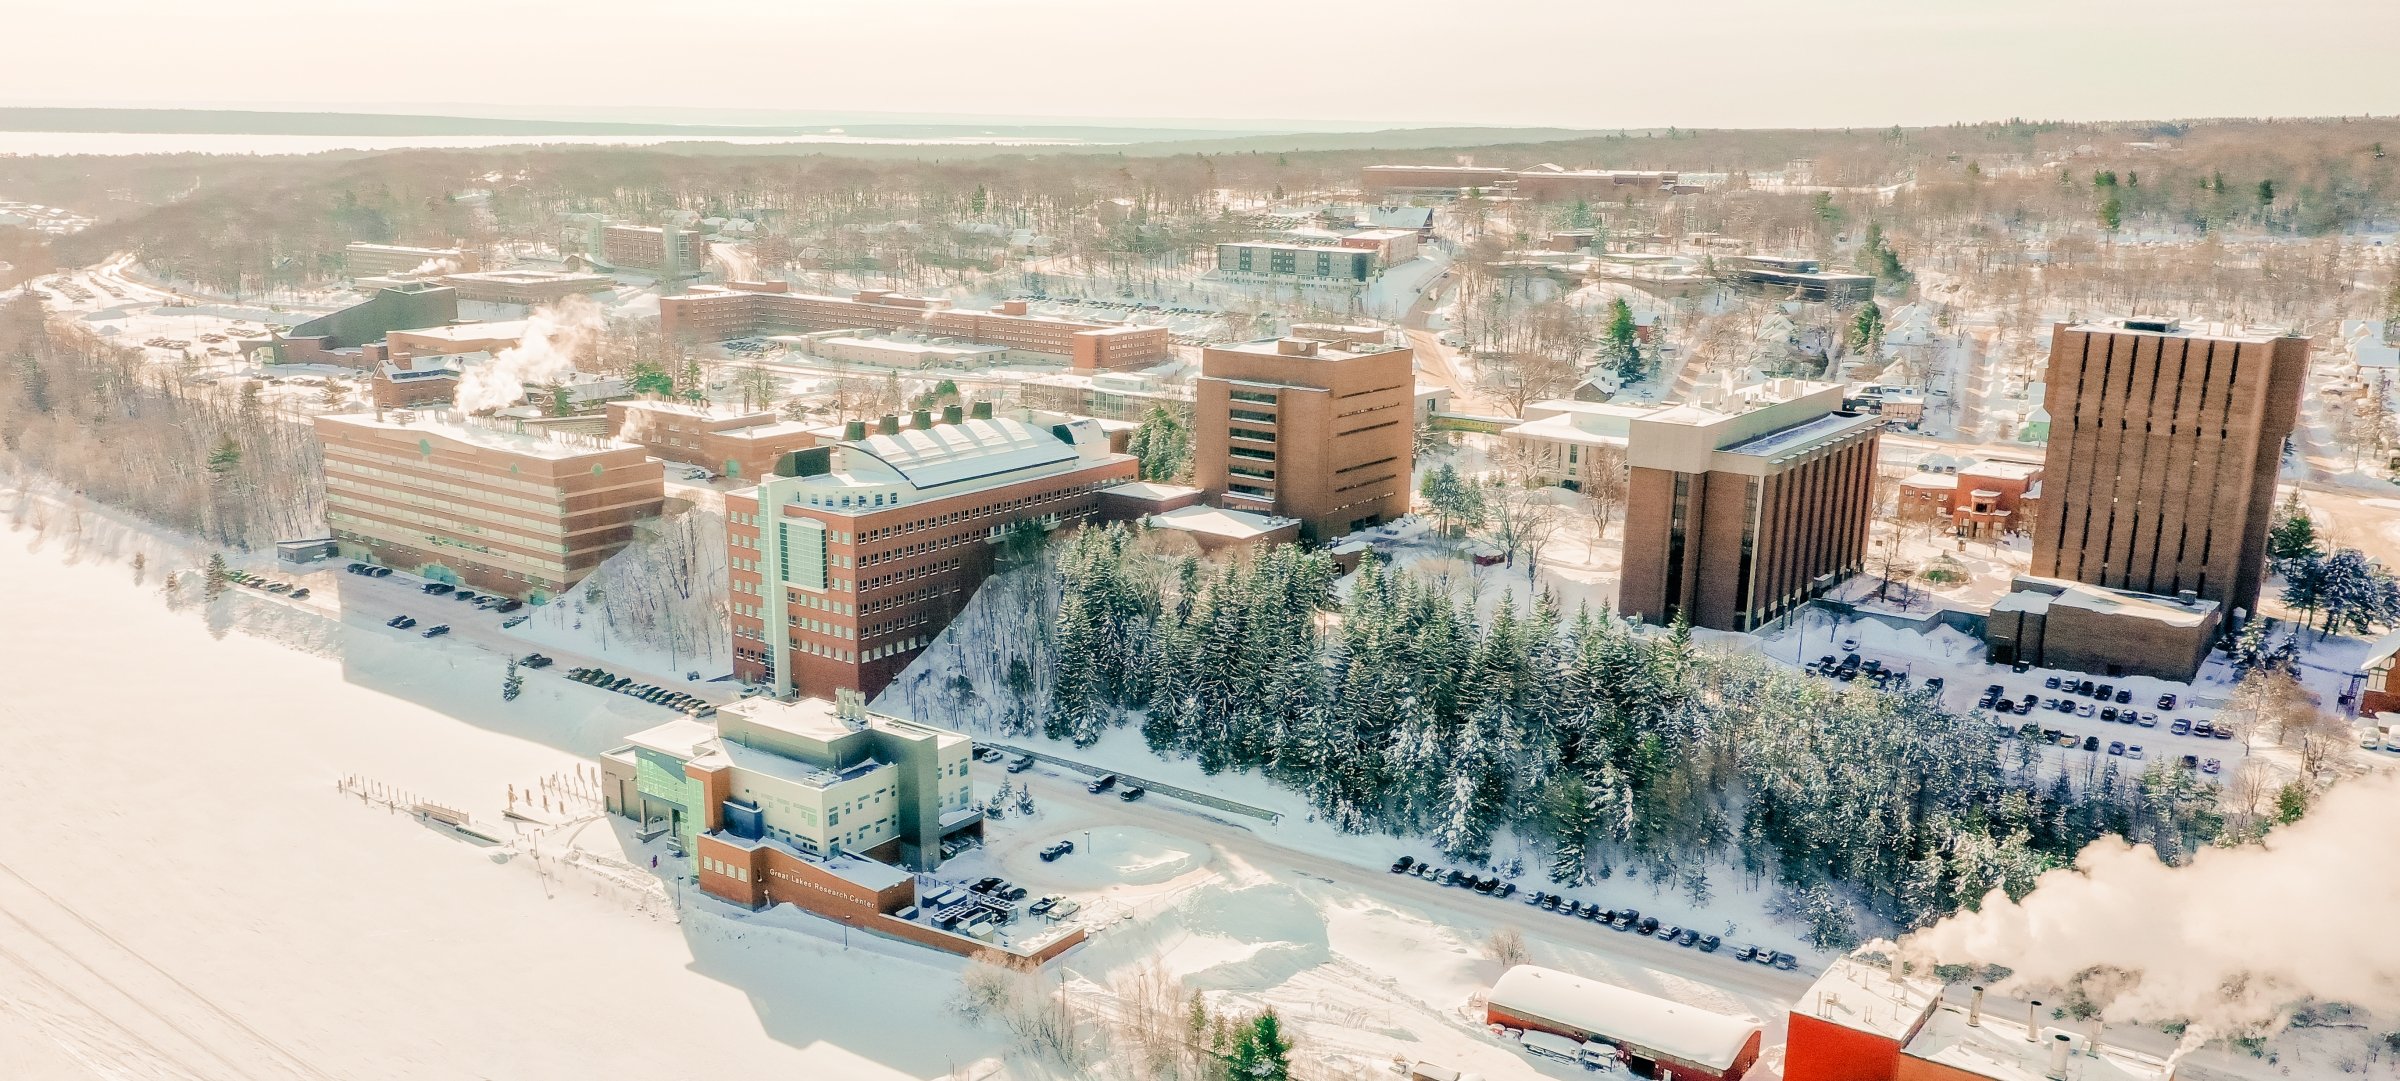 An aerial view of campus in the winter.